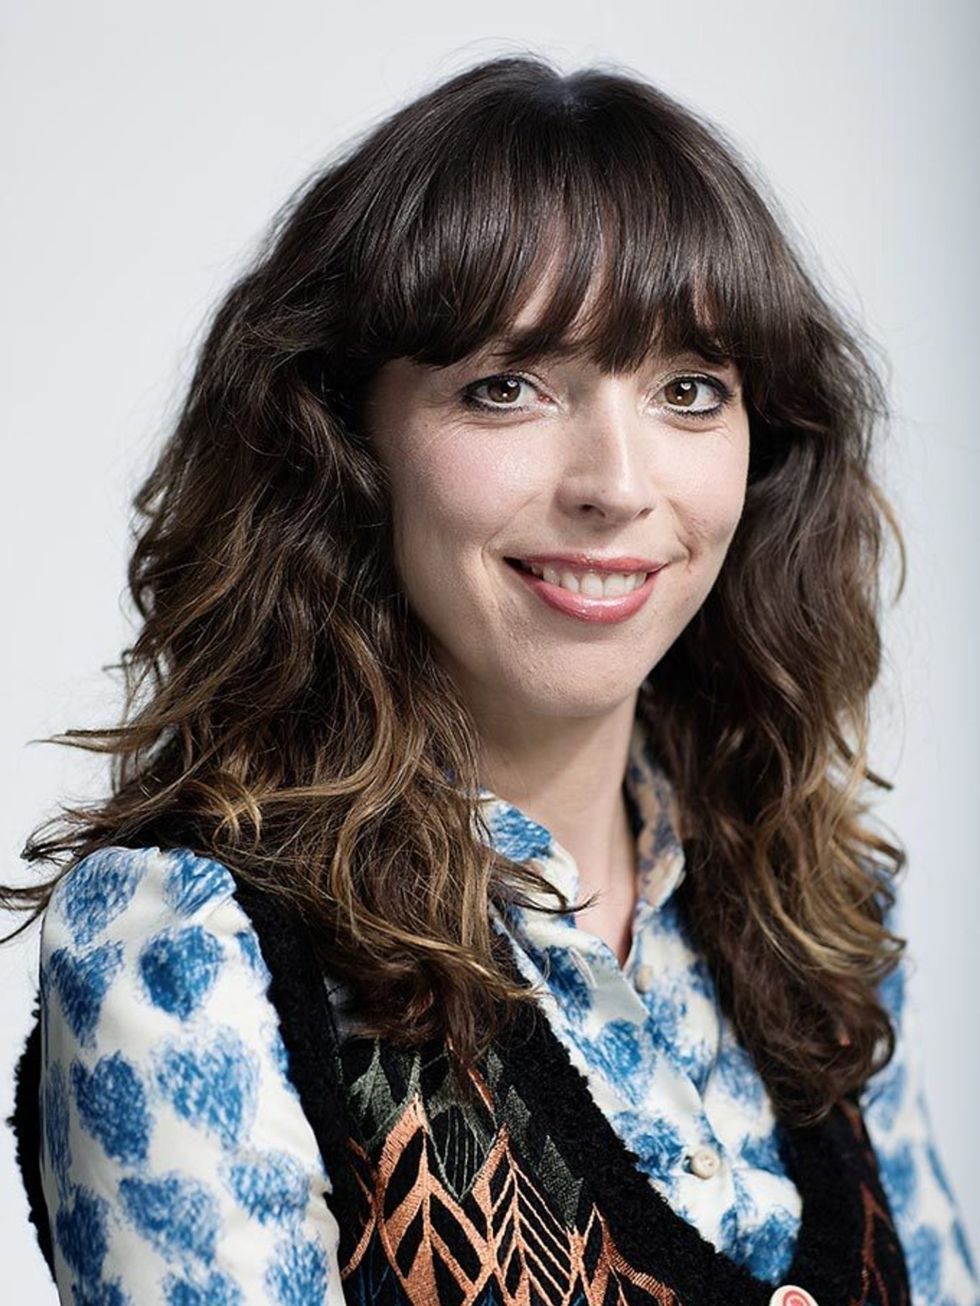 <p><strong>Bridget Christie, Comedian </strong></p>

<p>'There are so many women that inspire me but at the moment I am in awe of Karen Ingala Smith. The incredible work she is doing on gender based violence - from recognizing victims through her Counting